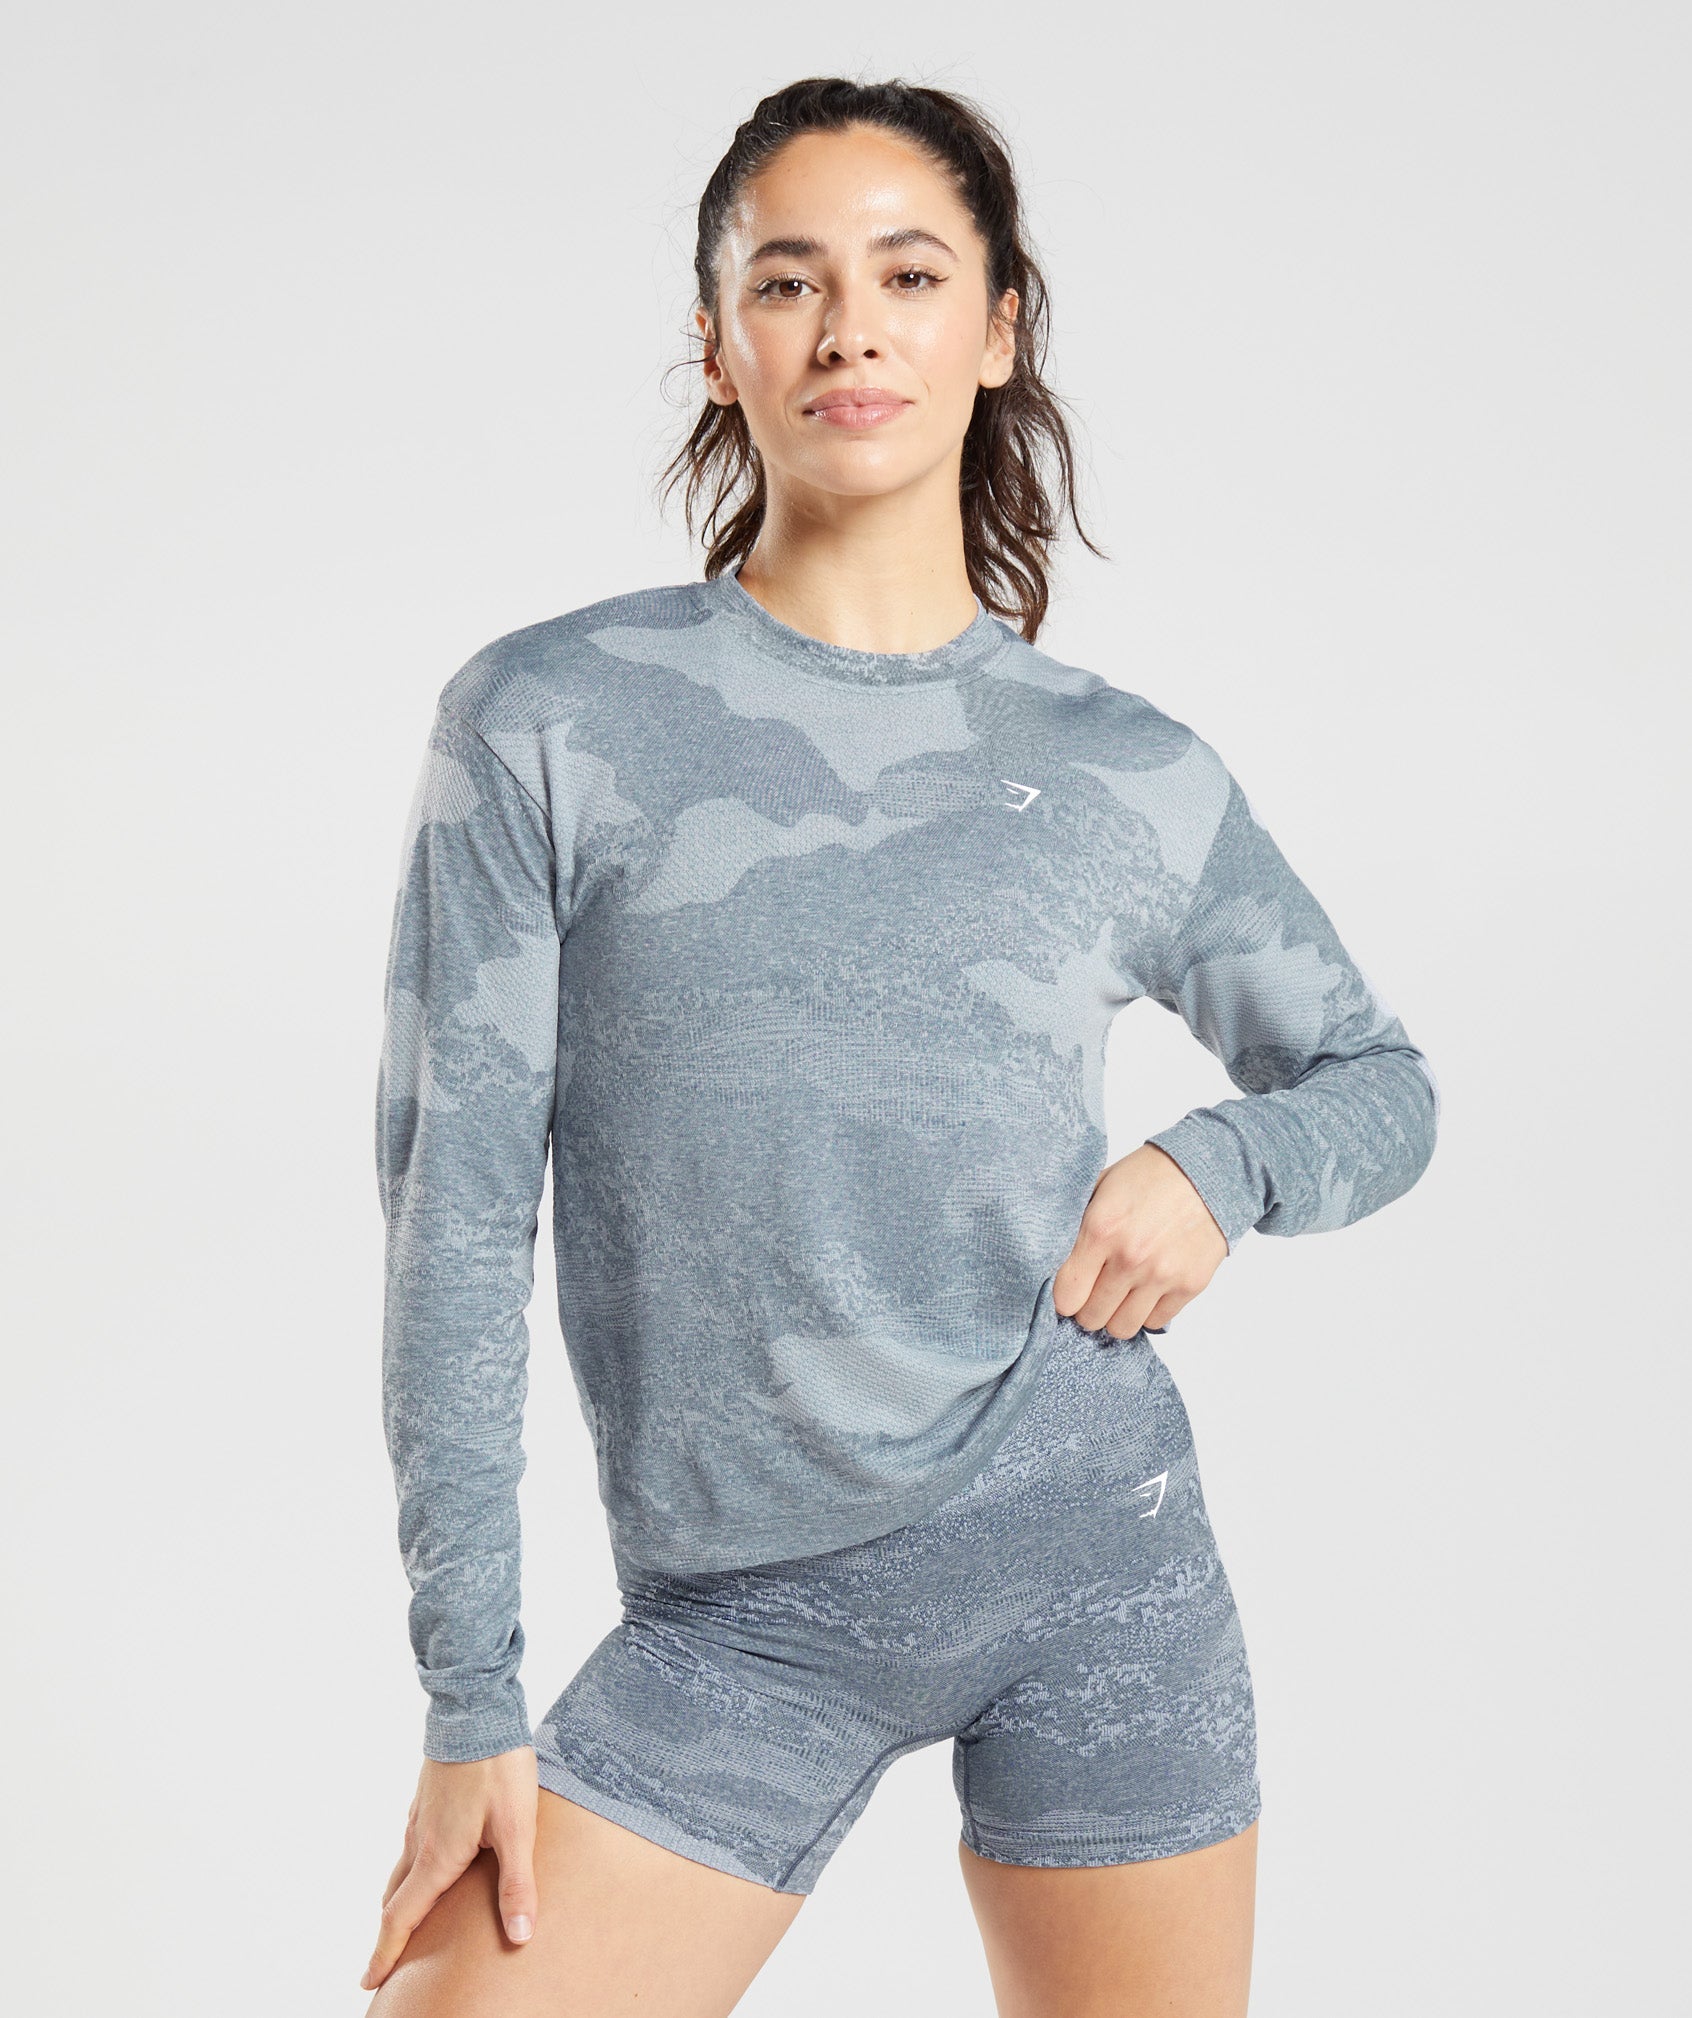 Adapt Camo Seamless Long Sleeve Top in River Stone Grey/Evening Blue - view 1